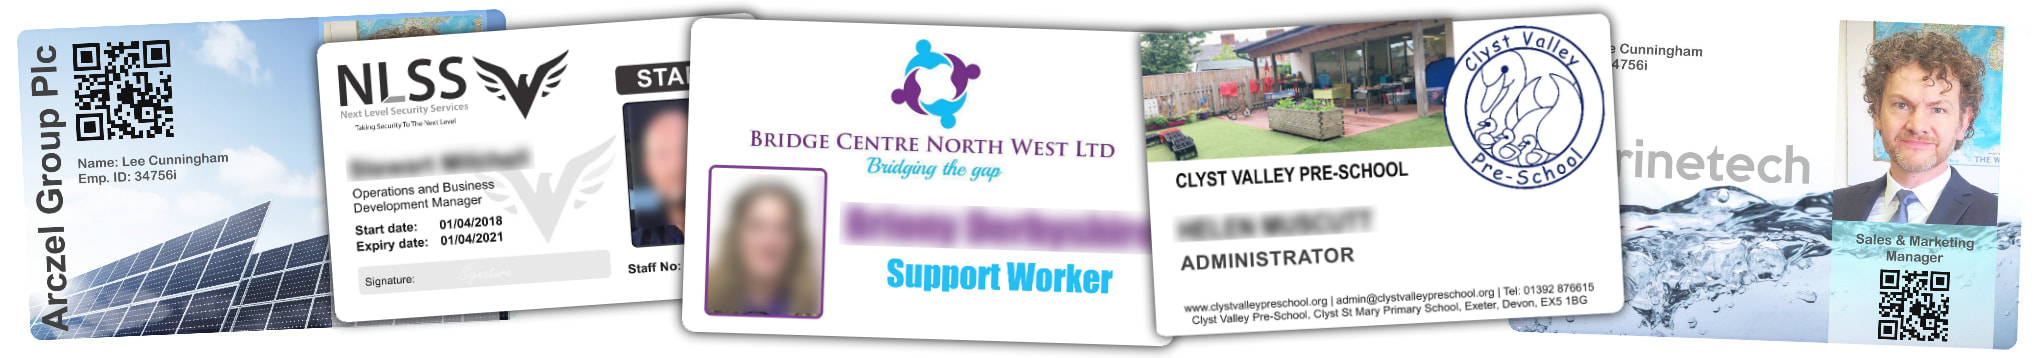 Bracknell Crowthorne Eton Hungerford Maidenhead Newbury Reading Sandhurst Slough Thatcham Windsor Wokingham Woodley examples of health care workers staff photo ID cards | samples of employee Identity card printing | Workers ID cards printed in 